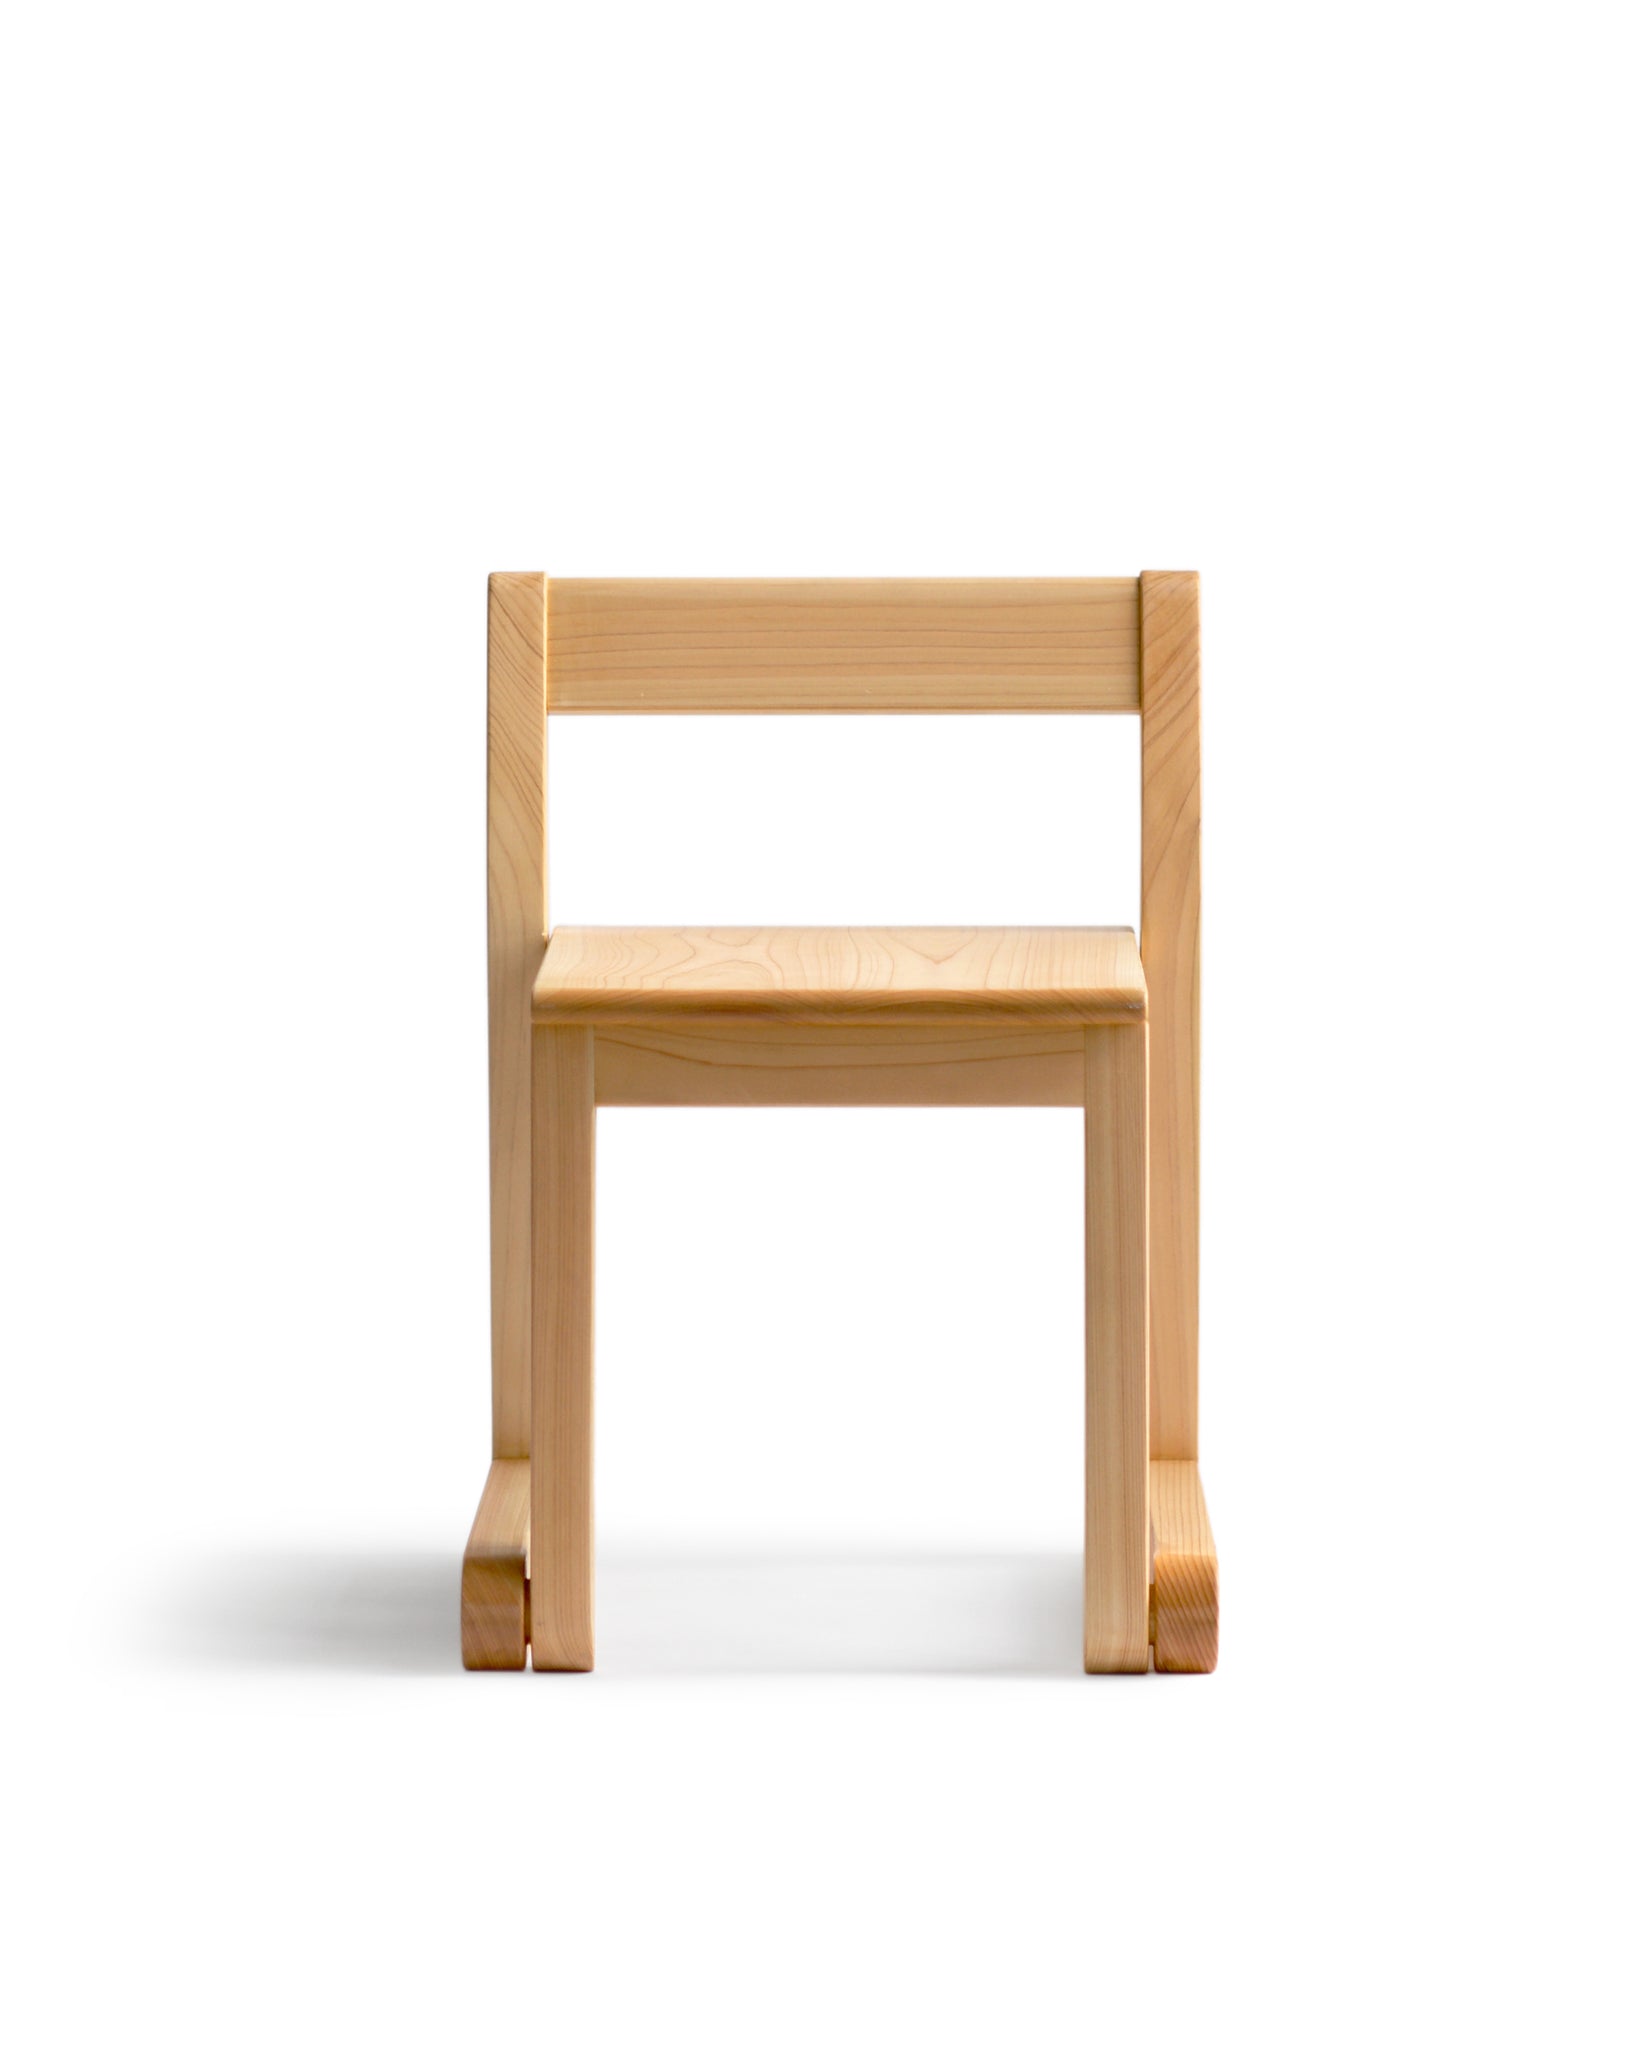 Silhouetted image of a 2 to 5 years old school chair against white background.